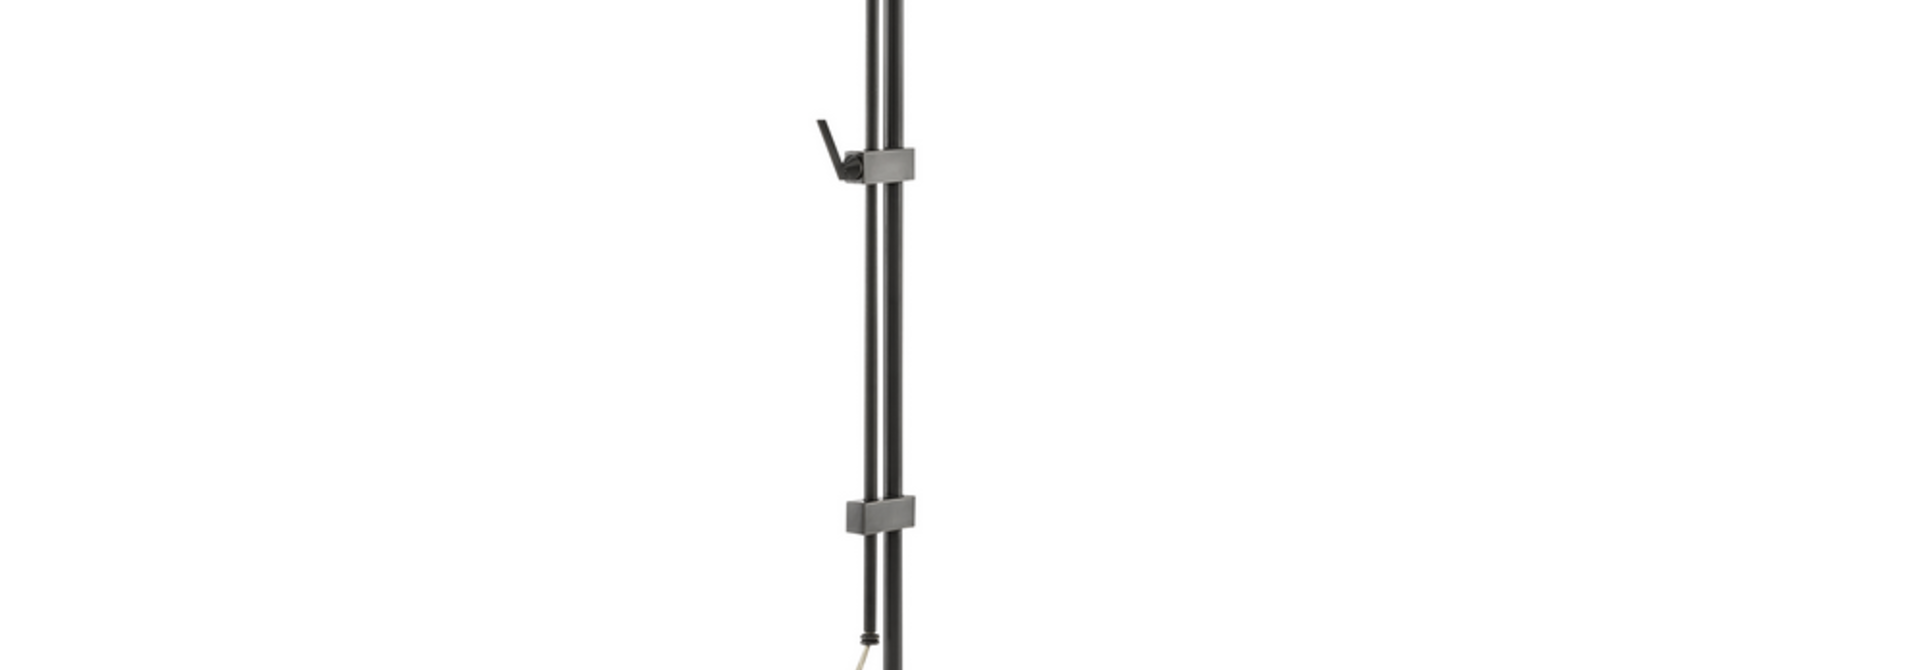 Hearst | The Floor Lamp Collection, 12 Inch x 26.75 Inch x 59.5 Inch